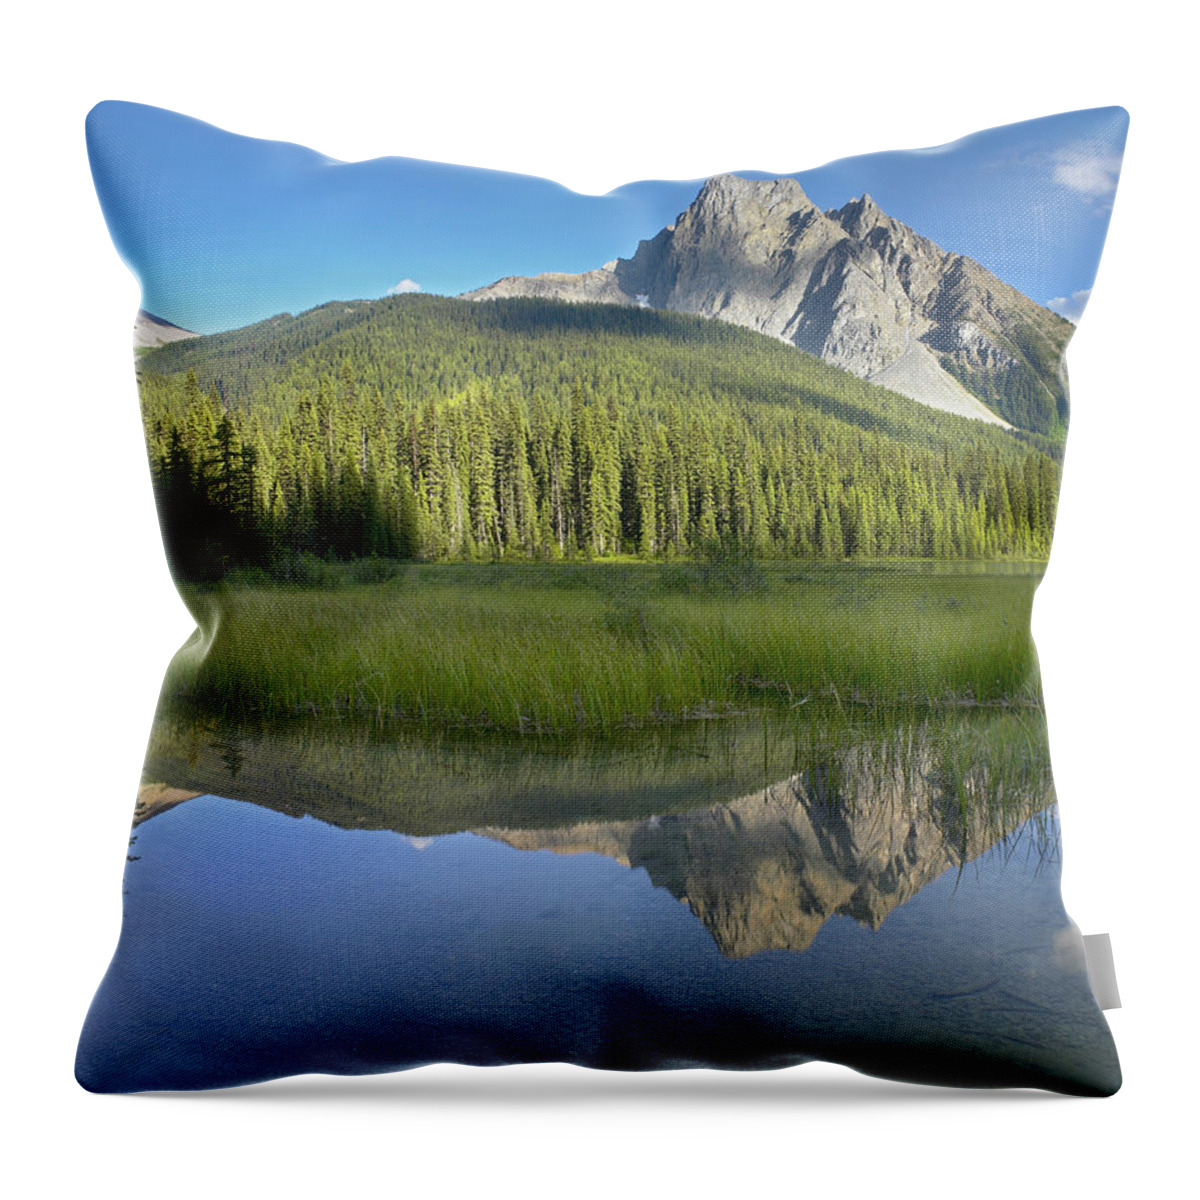 00175320 Throw Pillow featuring the photograph Mt Burgess Reflected In Emerald Lake by Tim Fitzharris